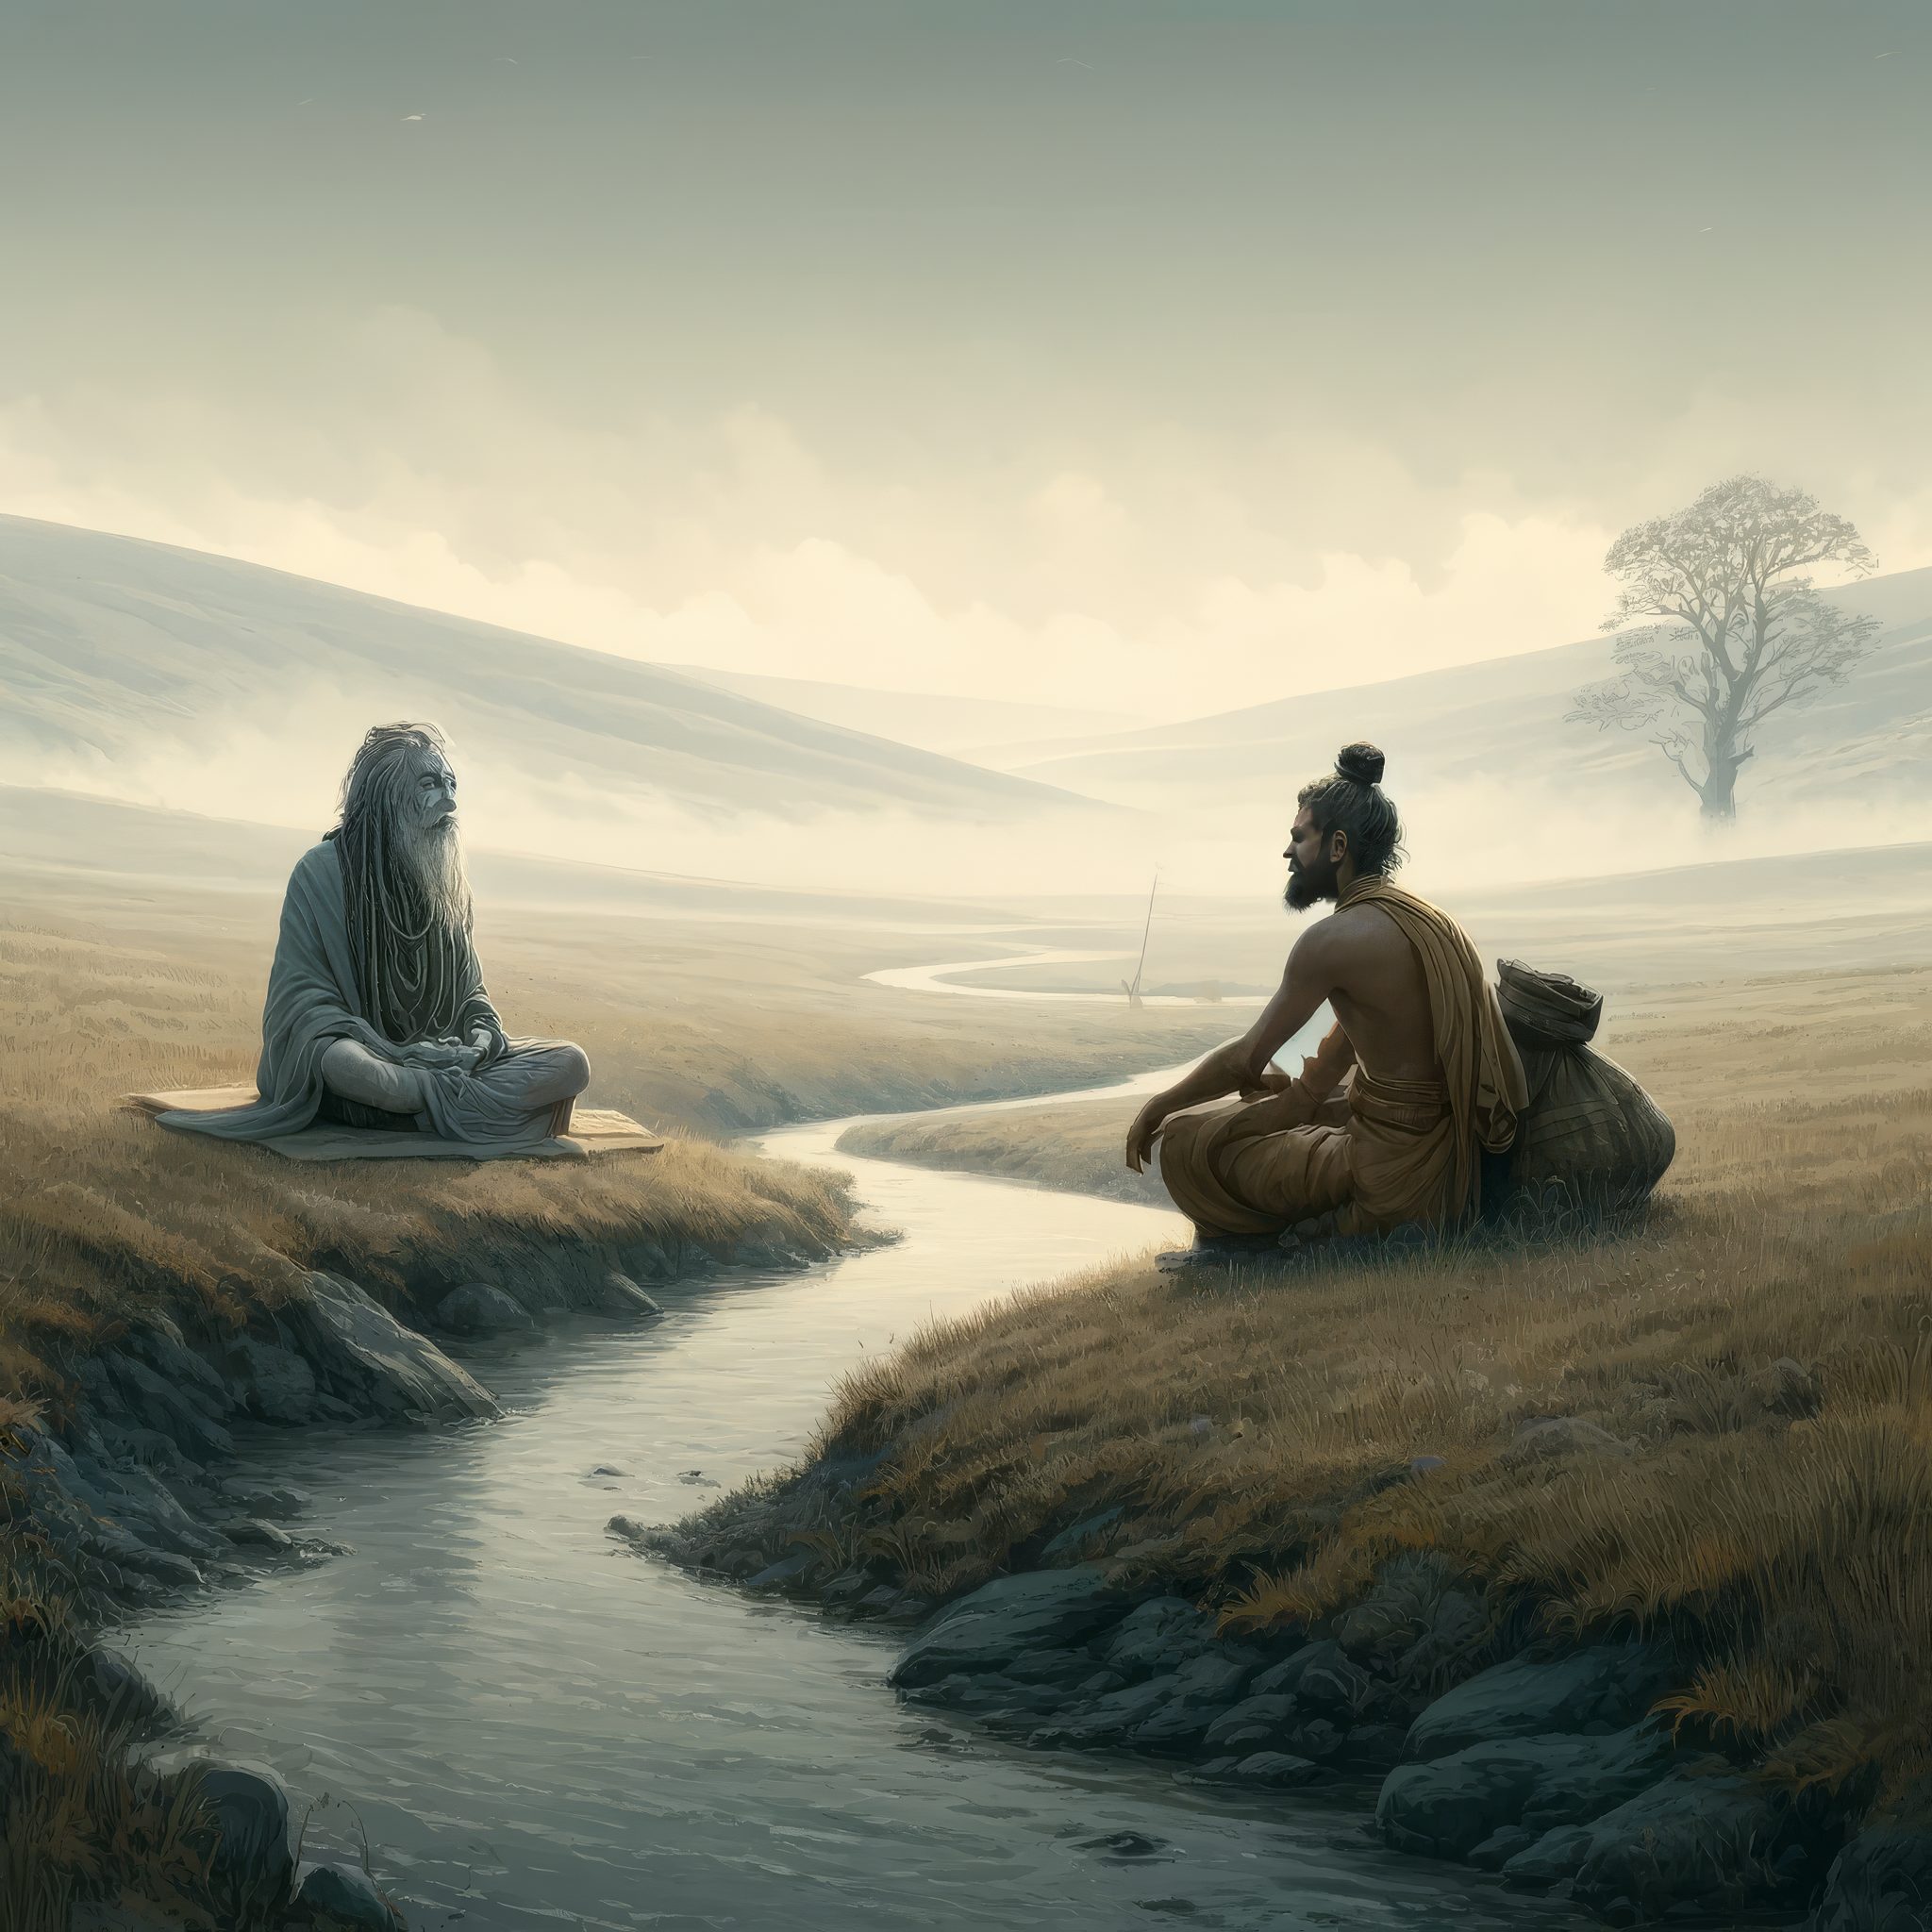 The Wanderer, a seeker of truths, pauses in contemplation before a wise sadhu by a stream, marking a pivotal point in his journey of self-discovery.